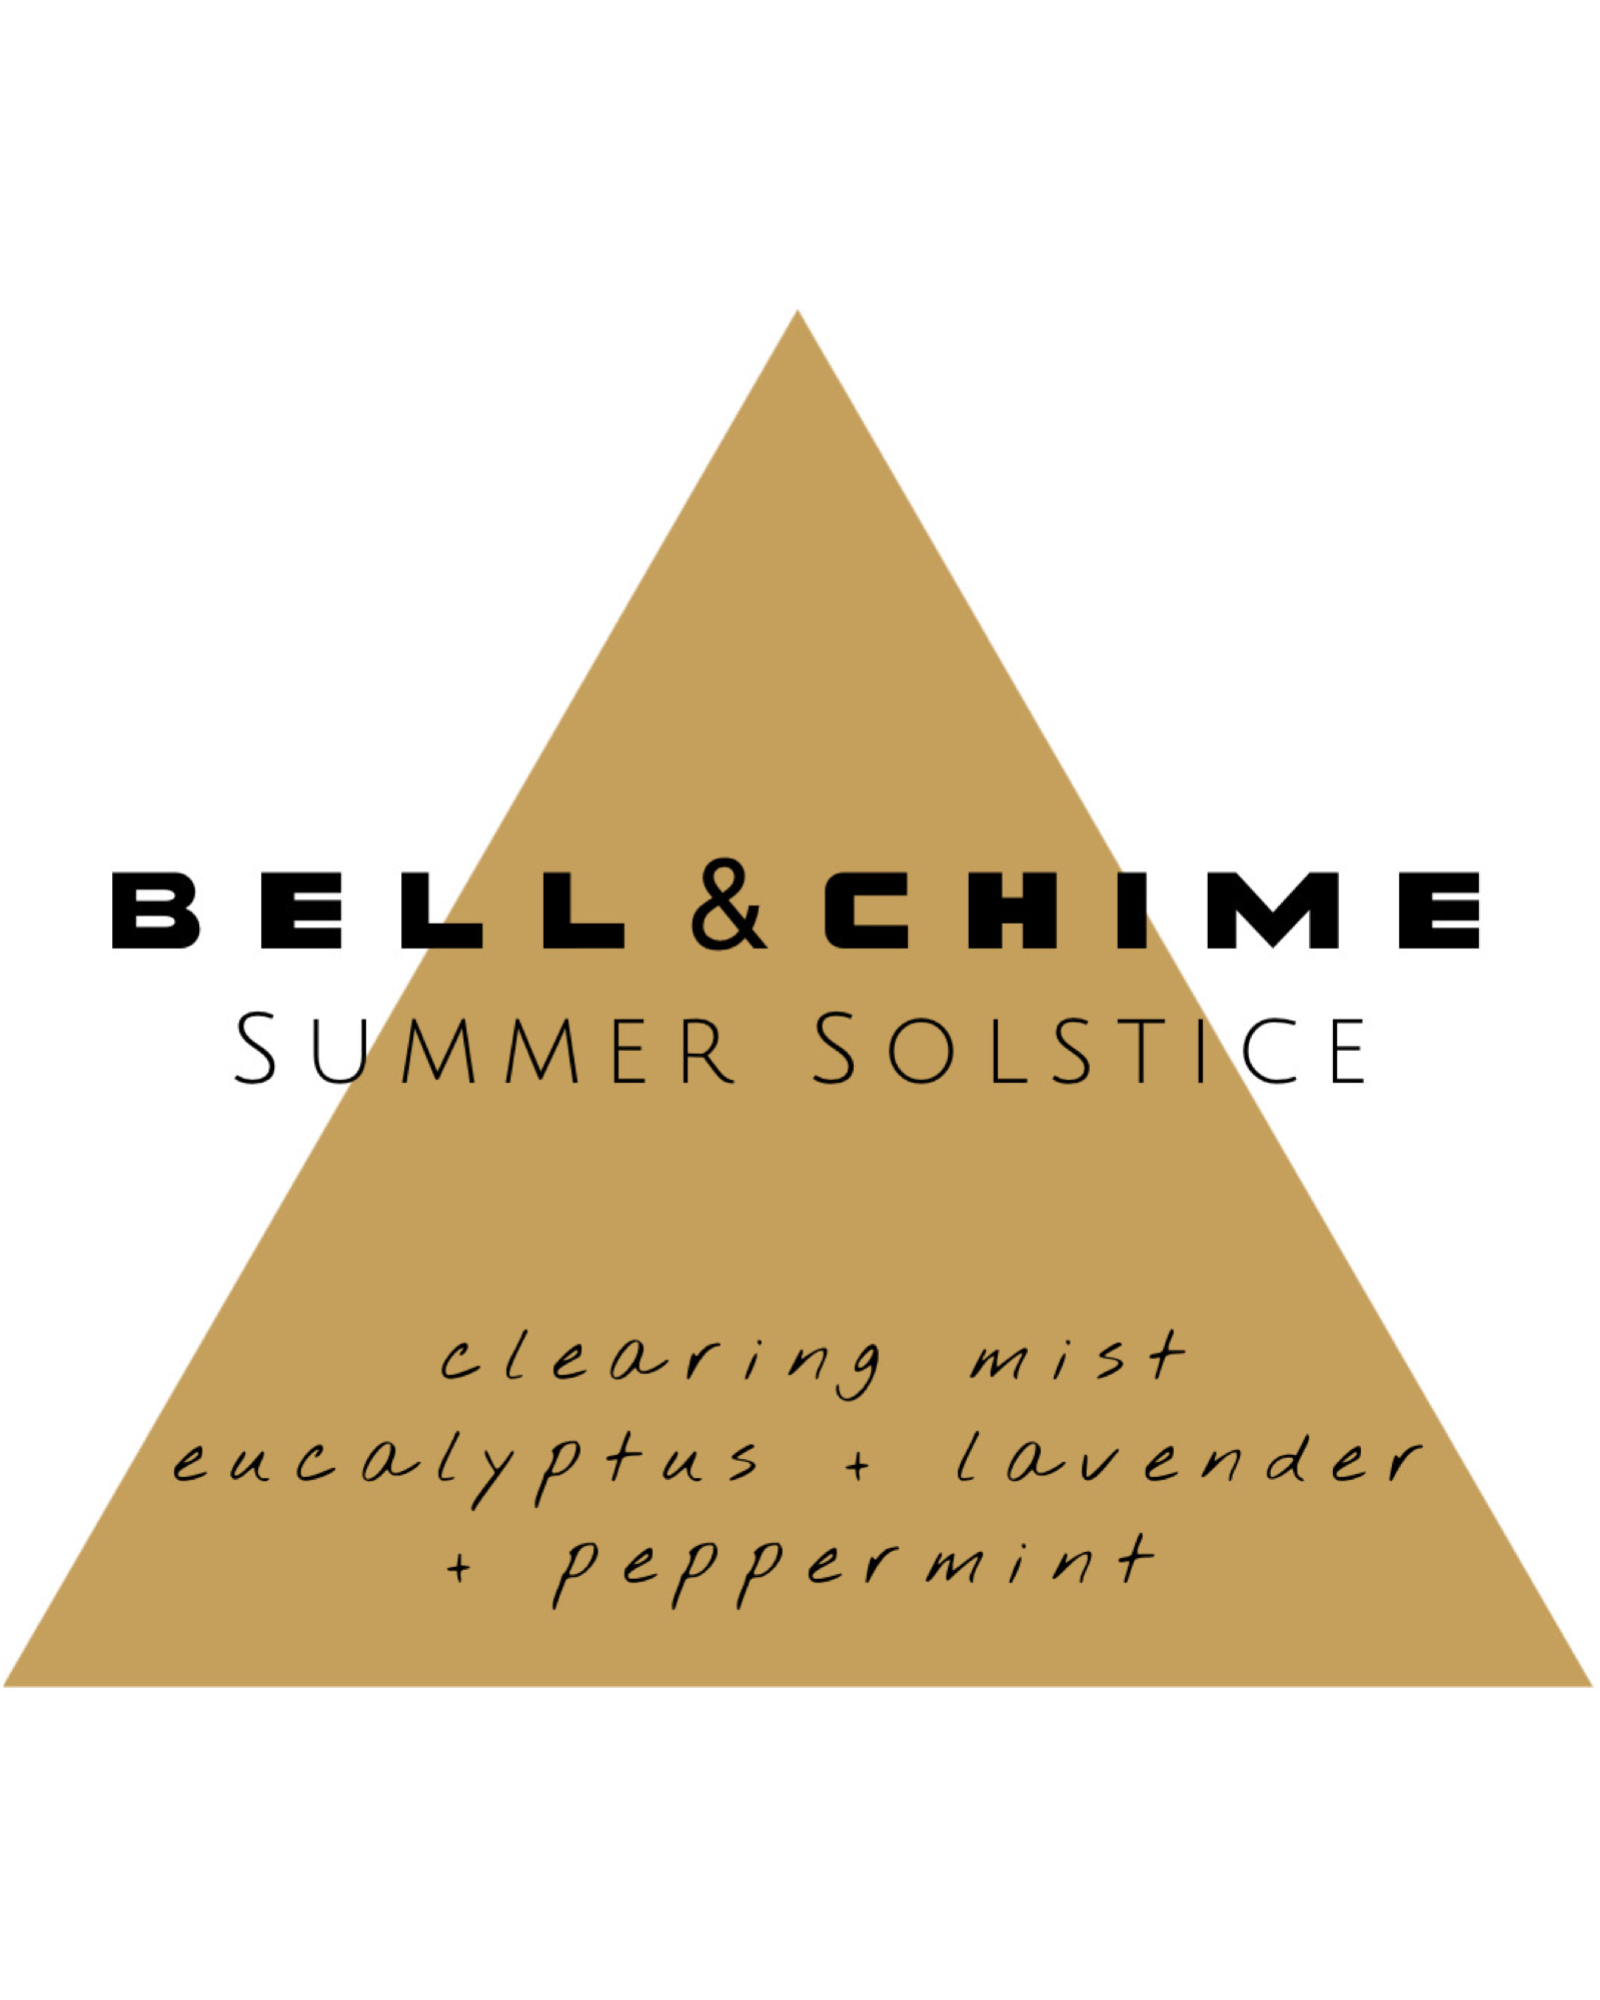 Bell & Chime: "Summer Solstice" Clearing Mist Eucalyptus + Lavender + Peppermint